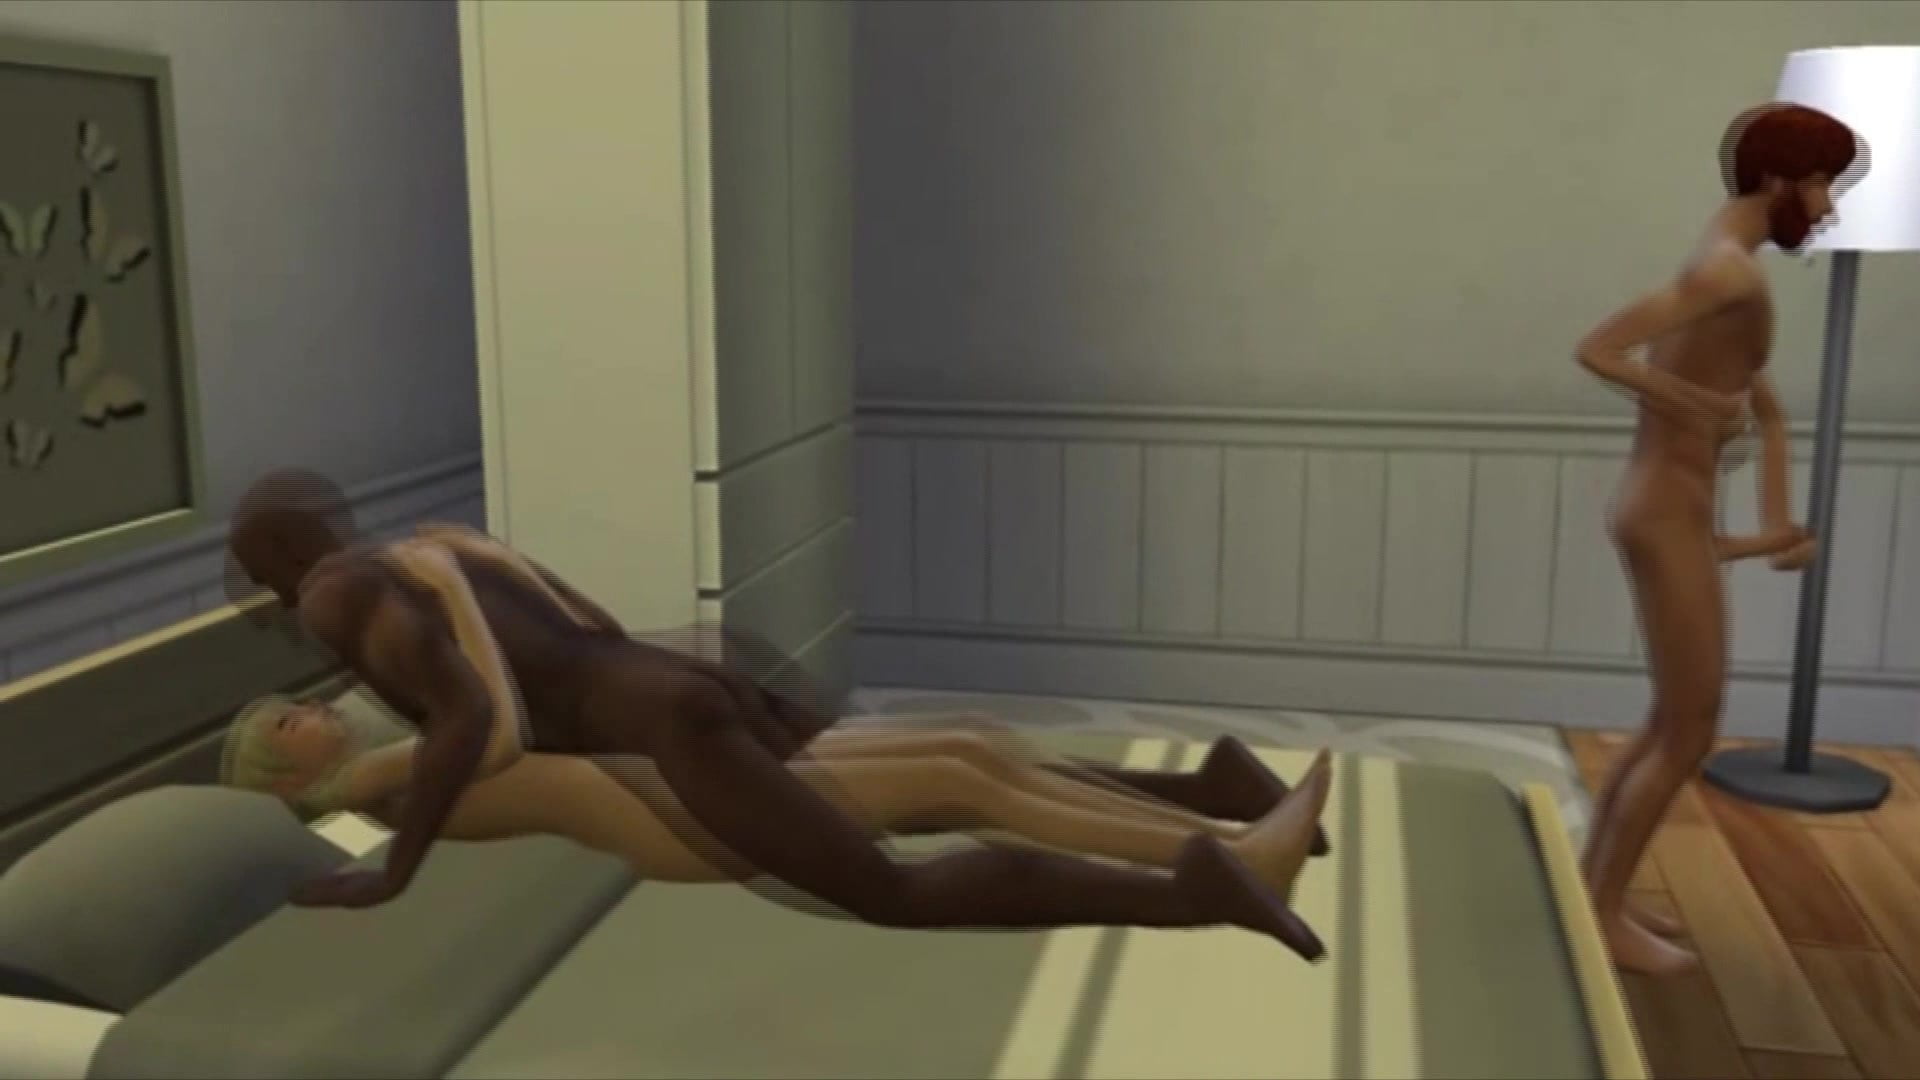 Watch Sims 4 BBC Cuckold tube sex video for free on xHamster